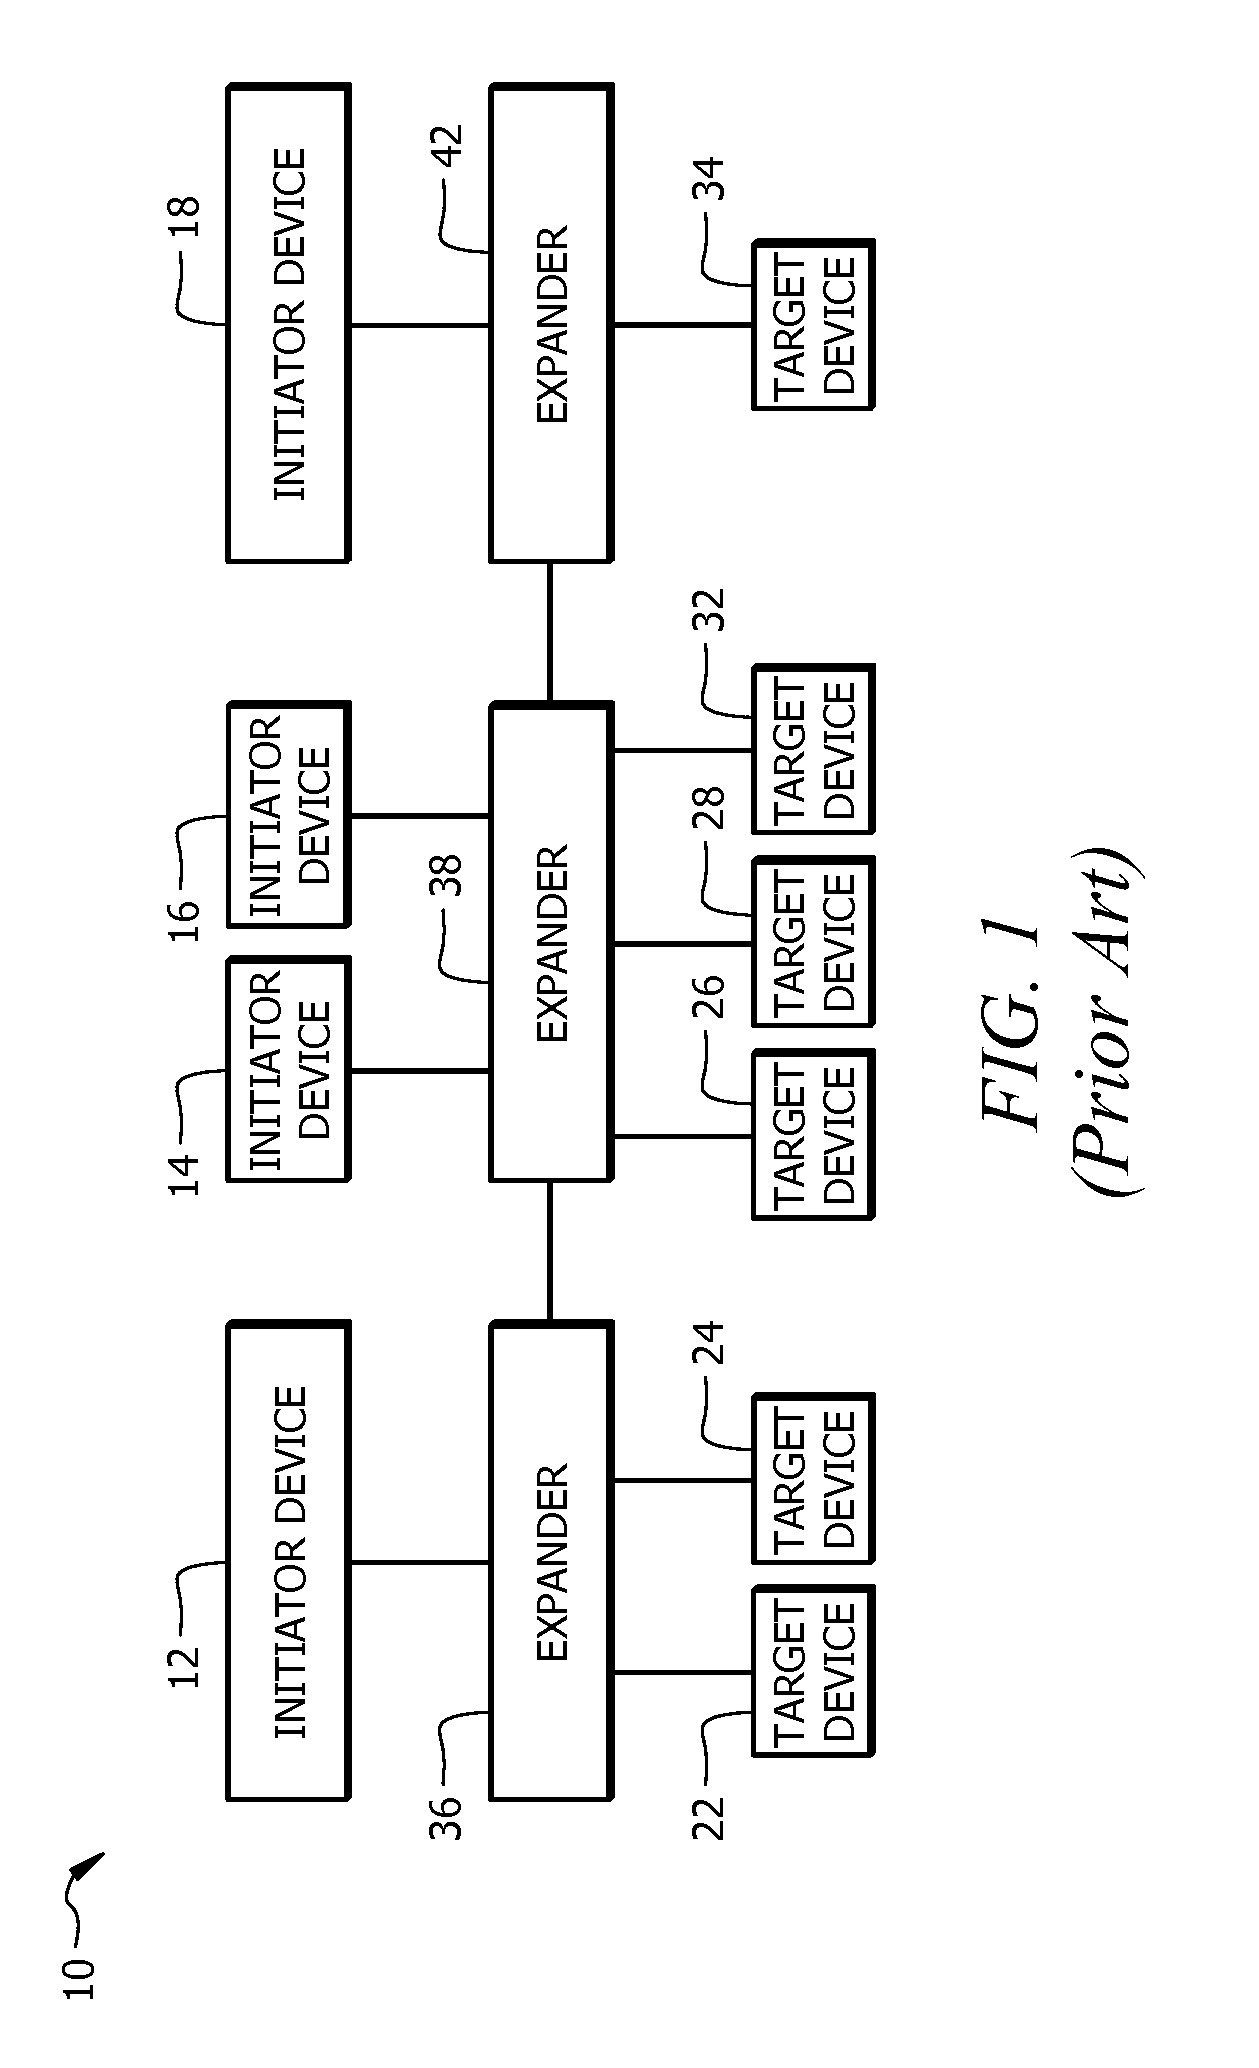 Method, apparatus and system for serial attached SCSI (SAS) zoning management of a domain using connector grouping